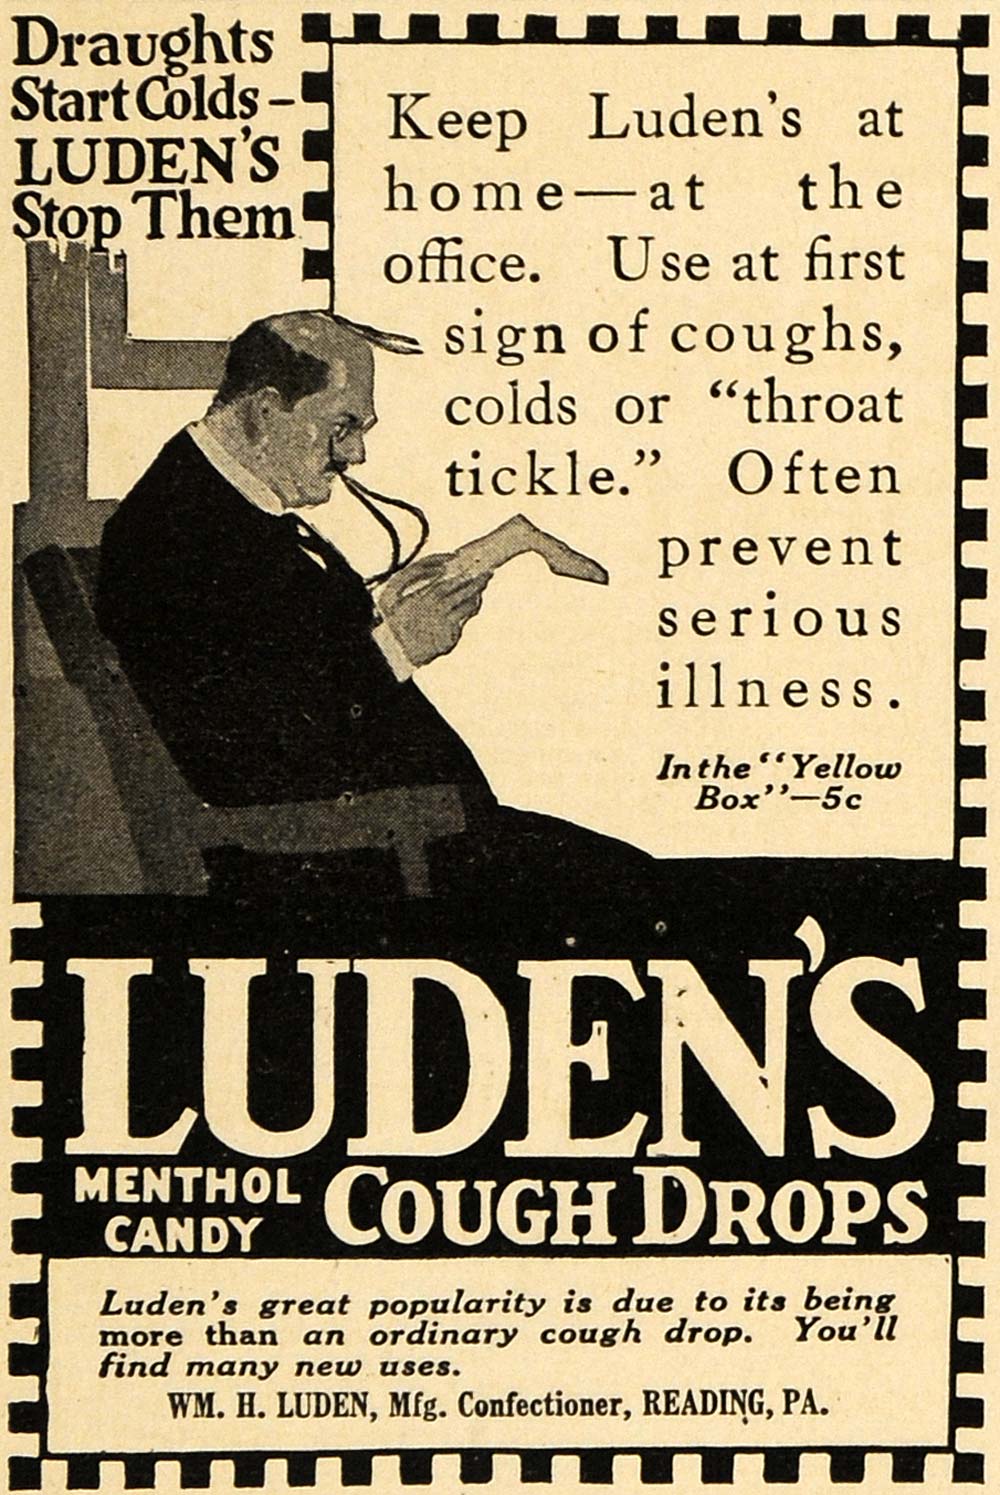 1916 Ad Luden Menthol Candy Cough Drops Remedy WWI - ORIGINAL ADVERTISING ILW1